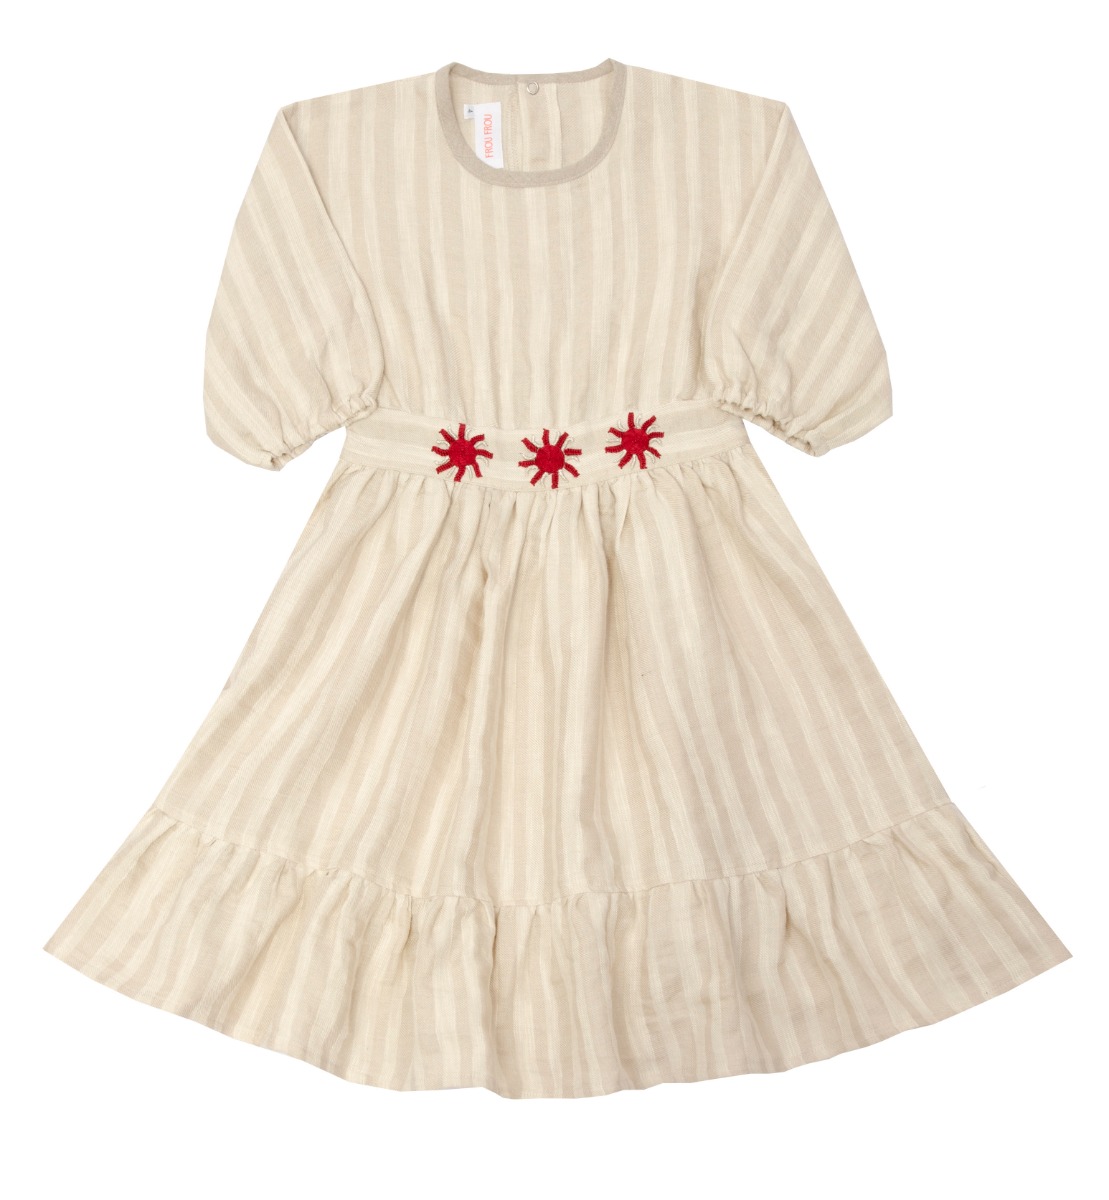 DRESS MARIE striped hand embroidered linen